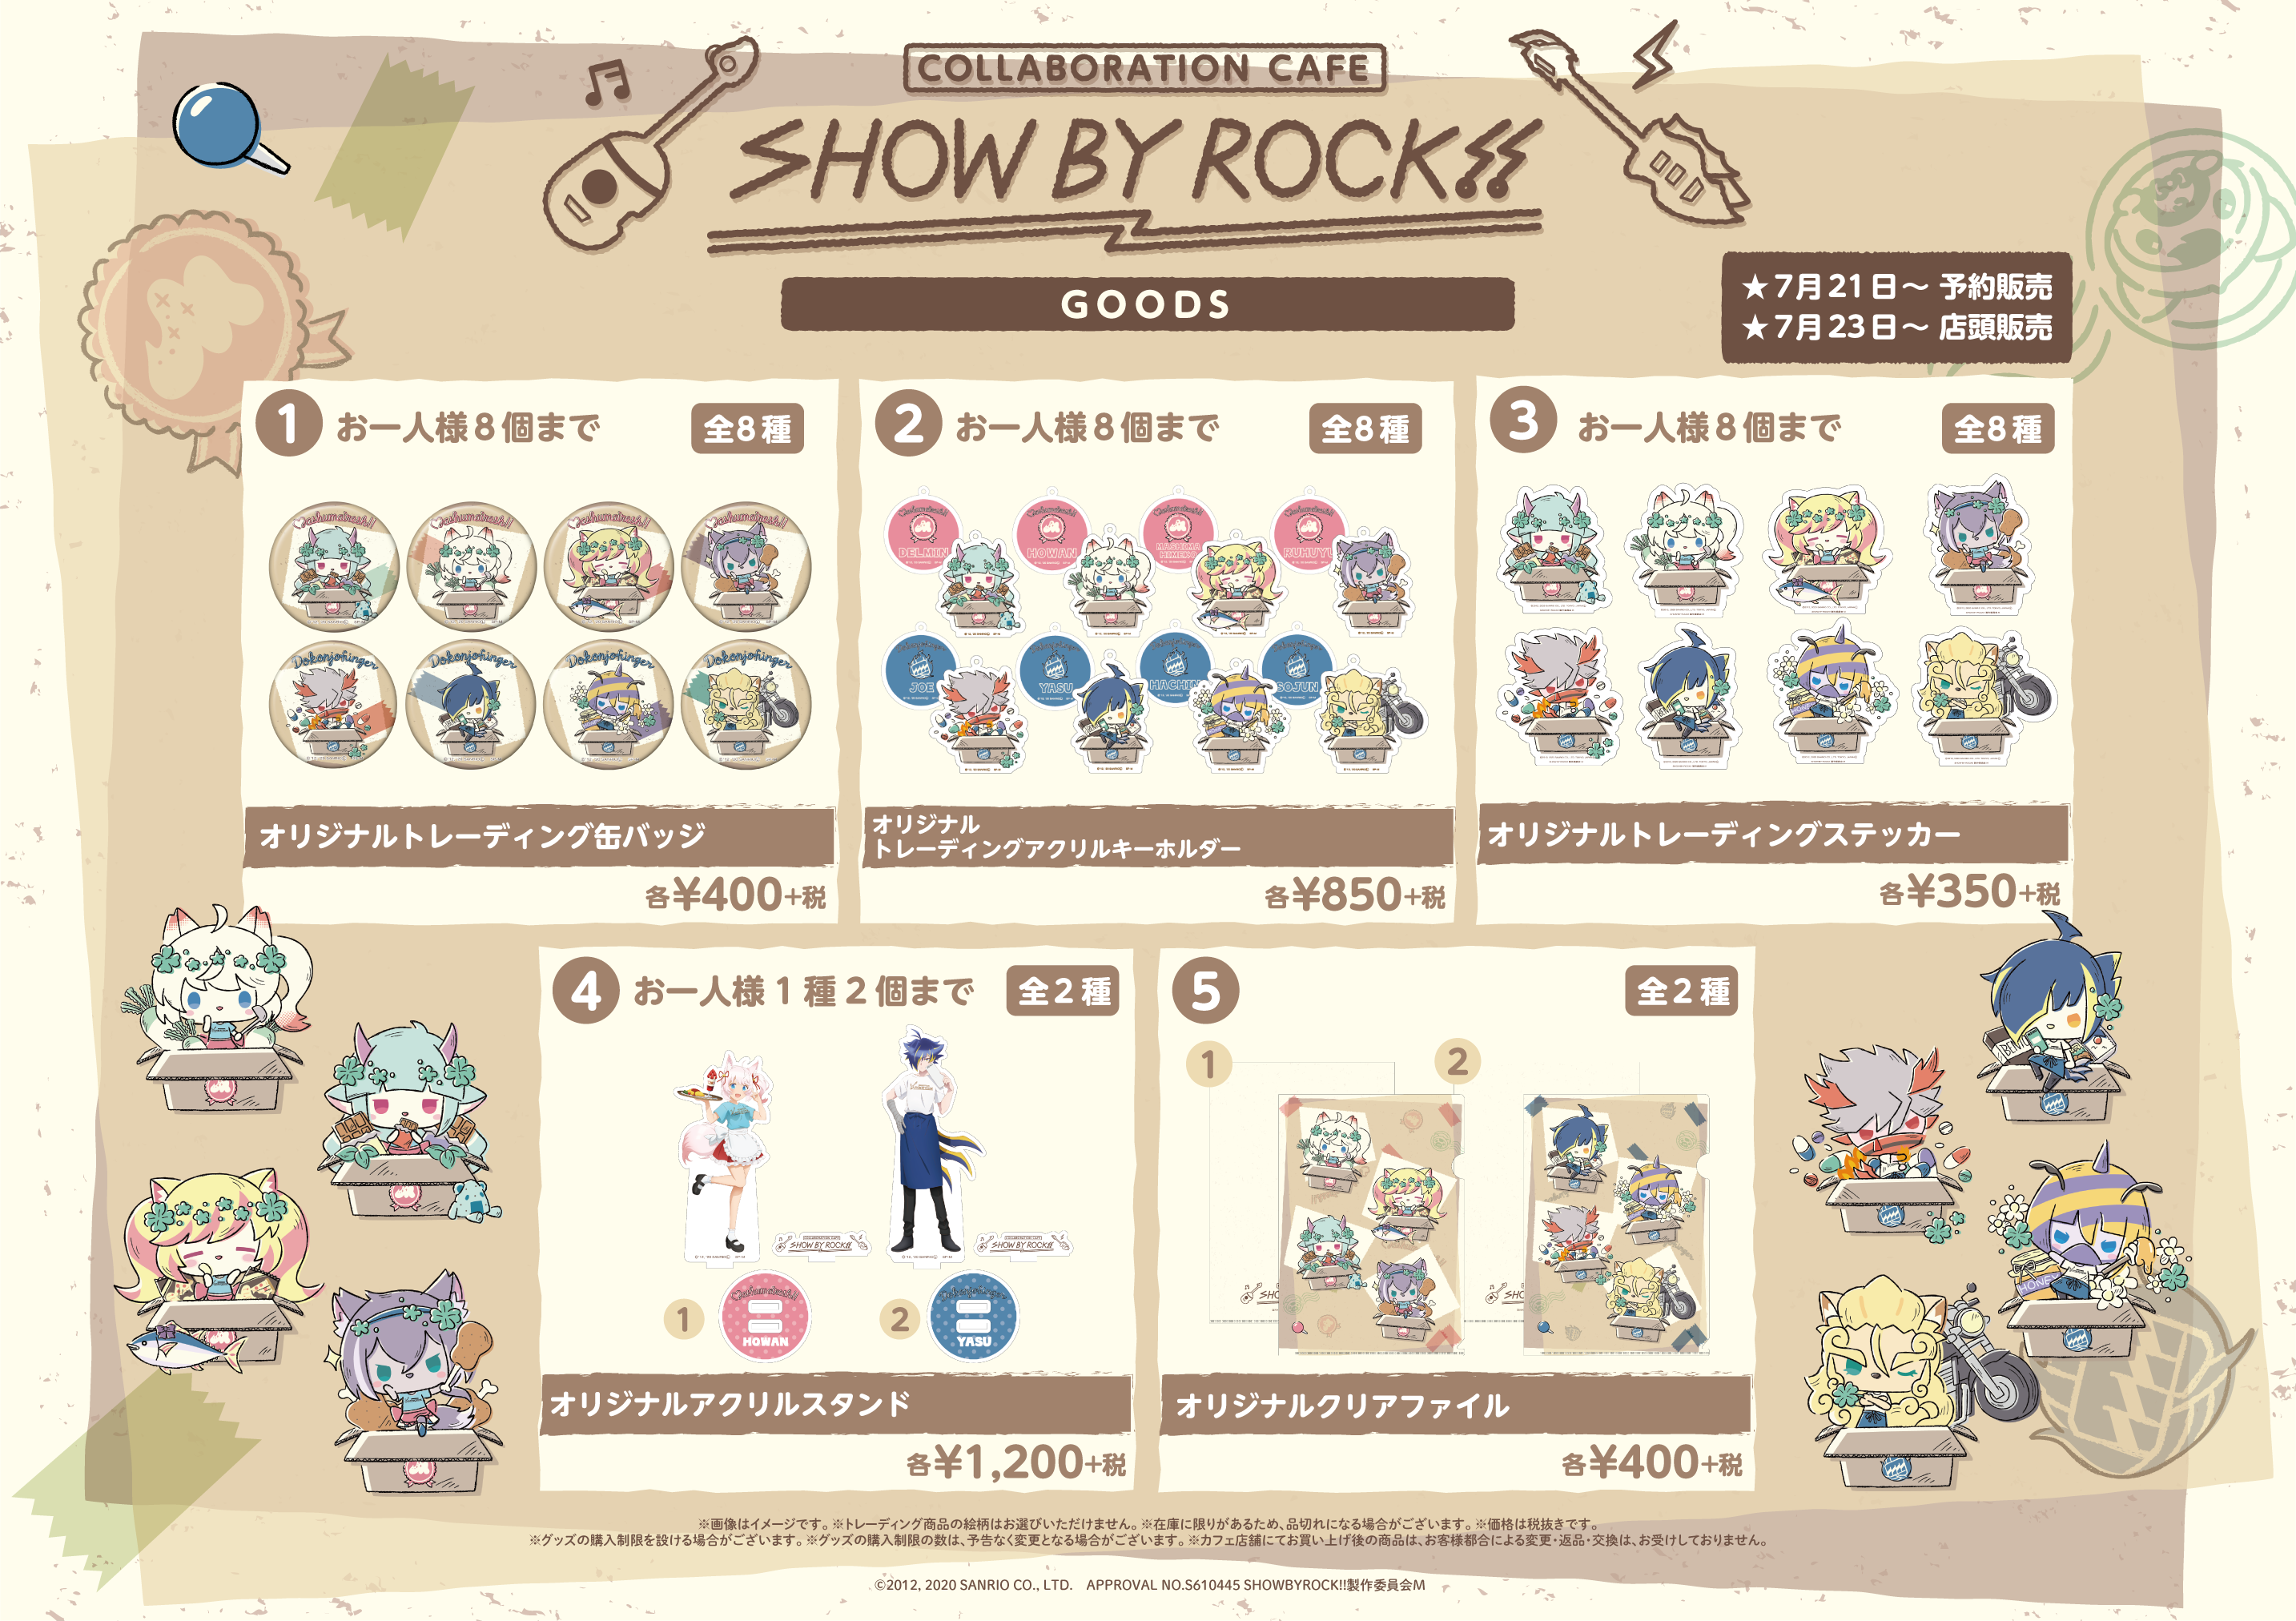 Show by Rock collaboration with The Guest Cafe – 欲望∞